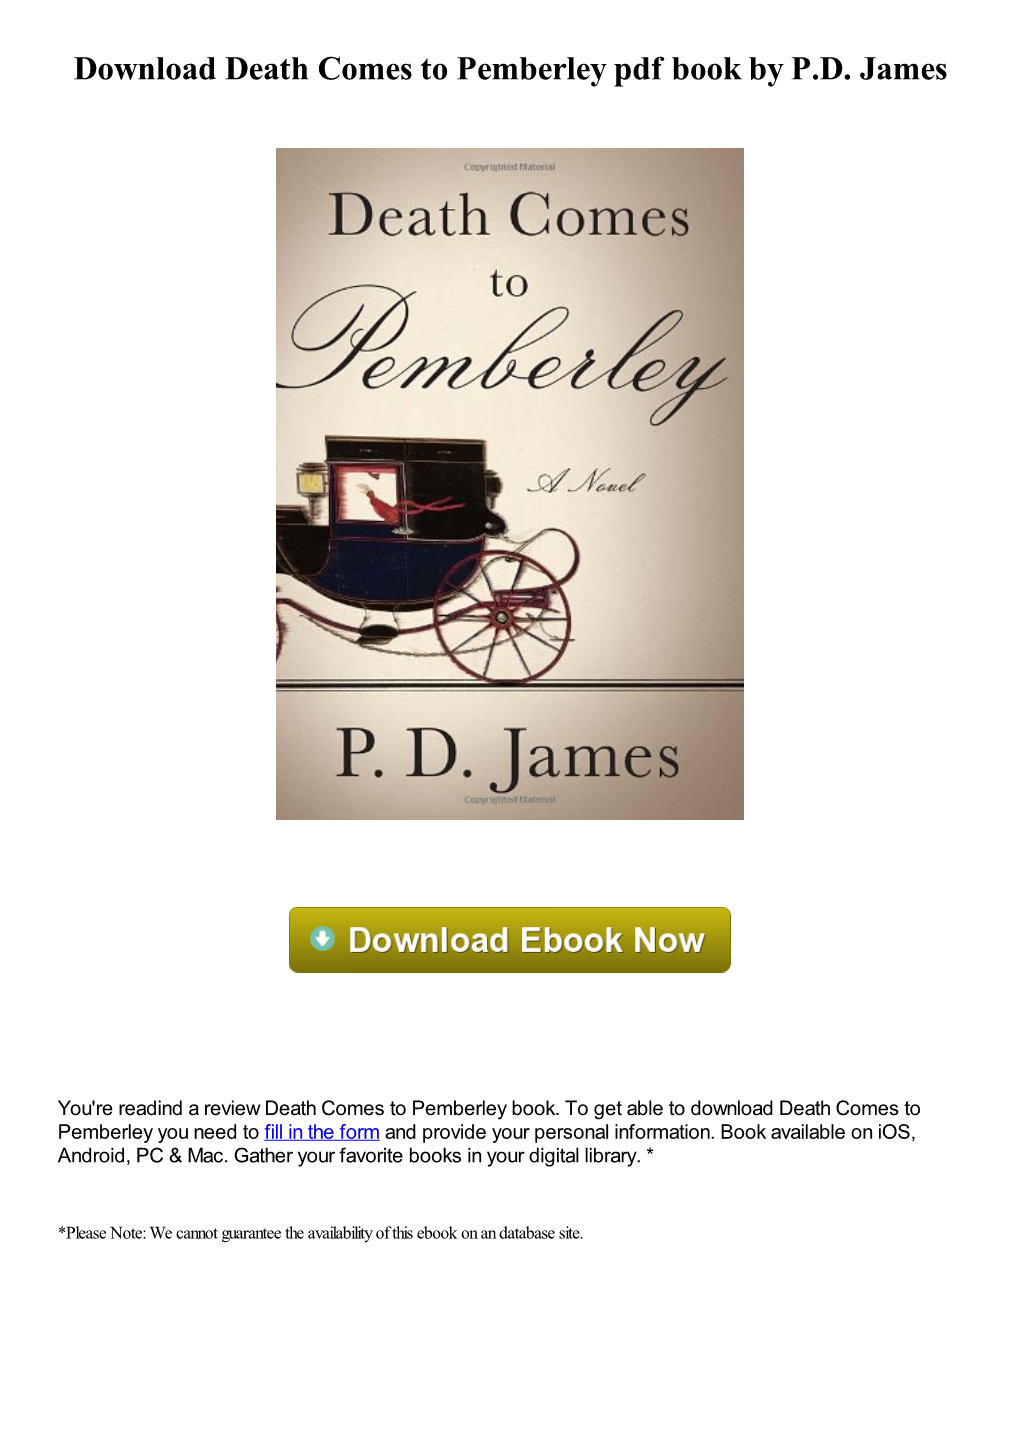 Download Death Comes to Pemberley Pdf Ebook by P.D. James